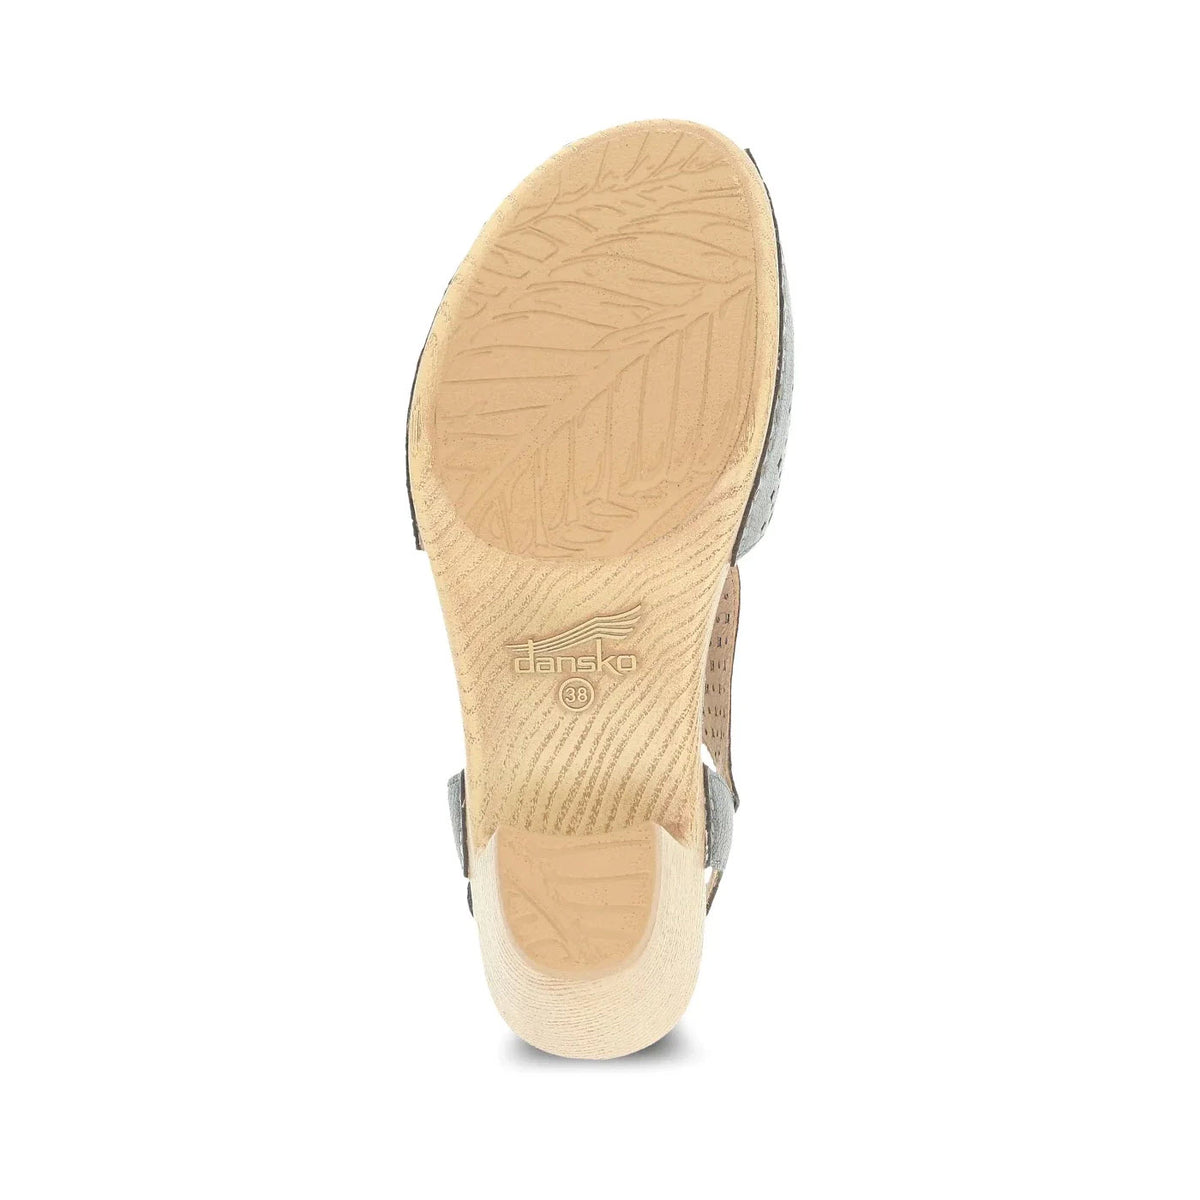 Bottom view of a beige Dansko Teagan Gunmetal Metallic clog showing the textured sole with a leaf pattern and embossed brand logo, featuring a cushioned polyurethane footbed.